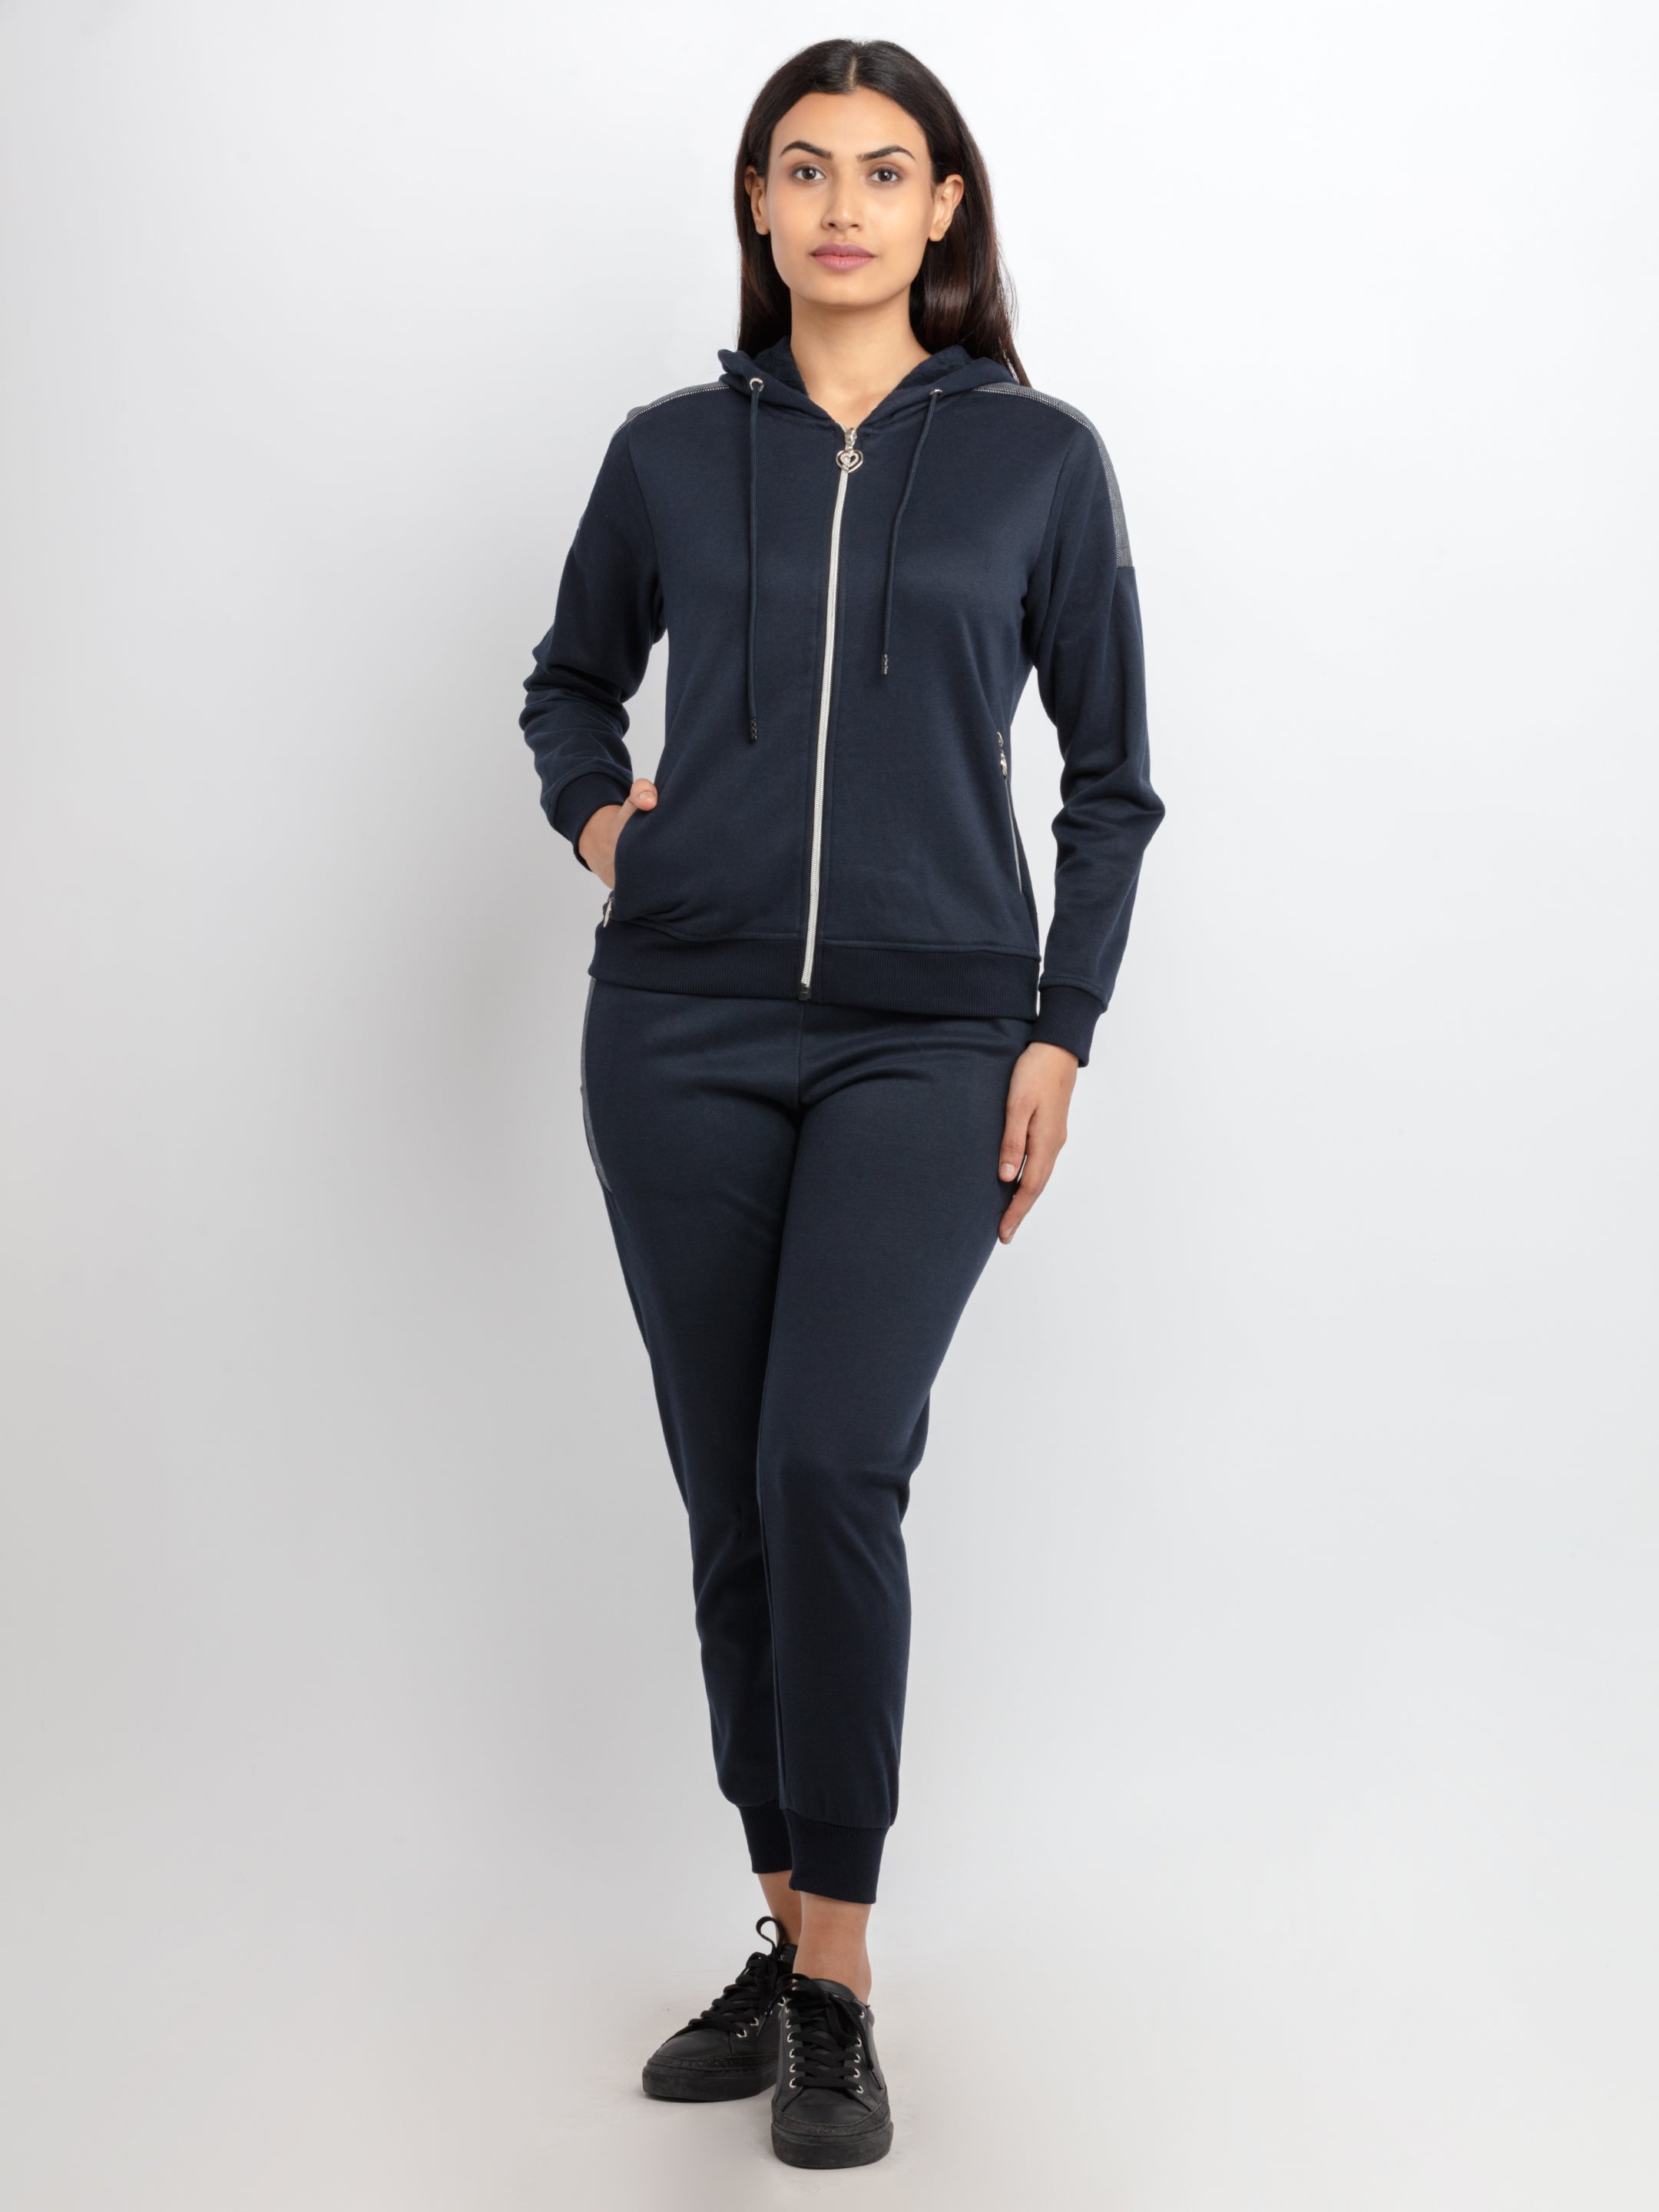 Womens Solid Zipper Tracksuit - S / Navy / SQW-TRACKSUIT-22890-Navy